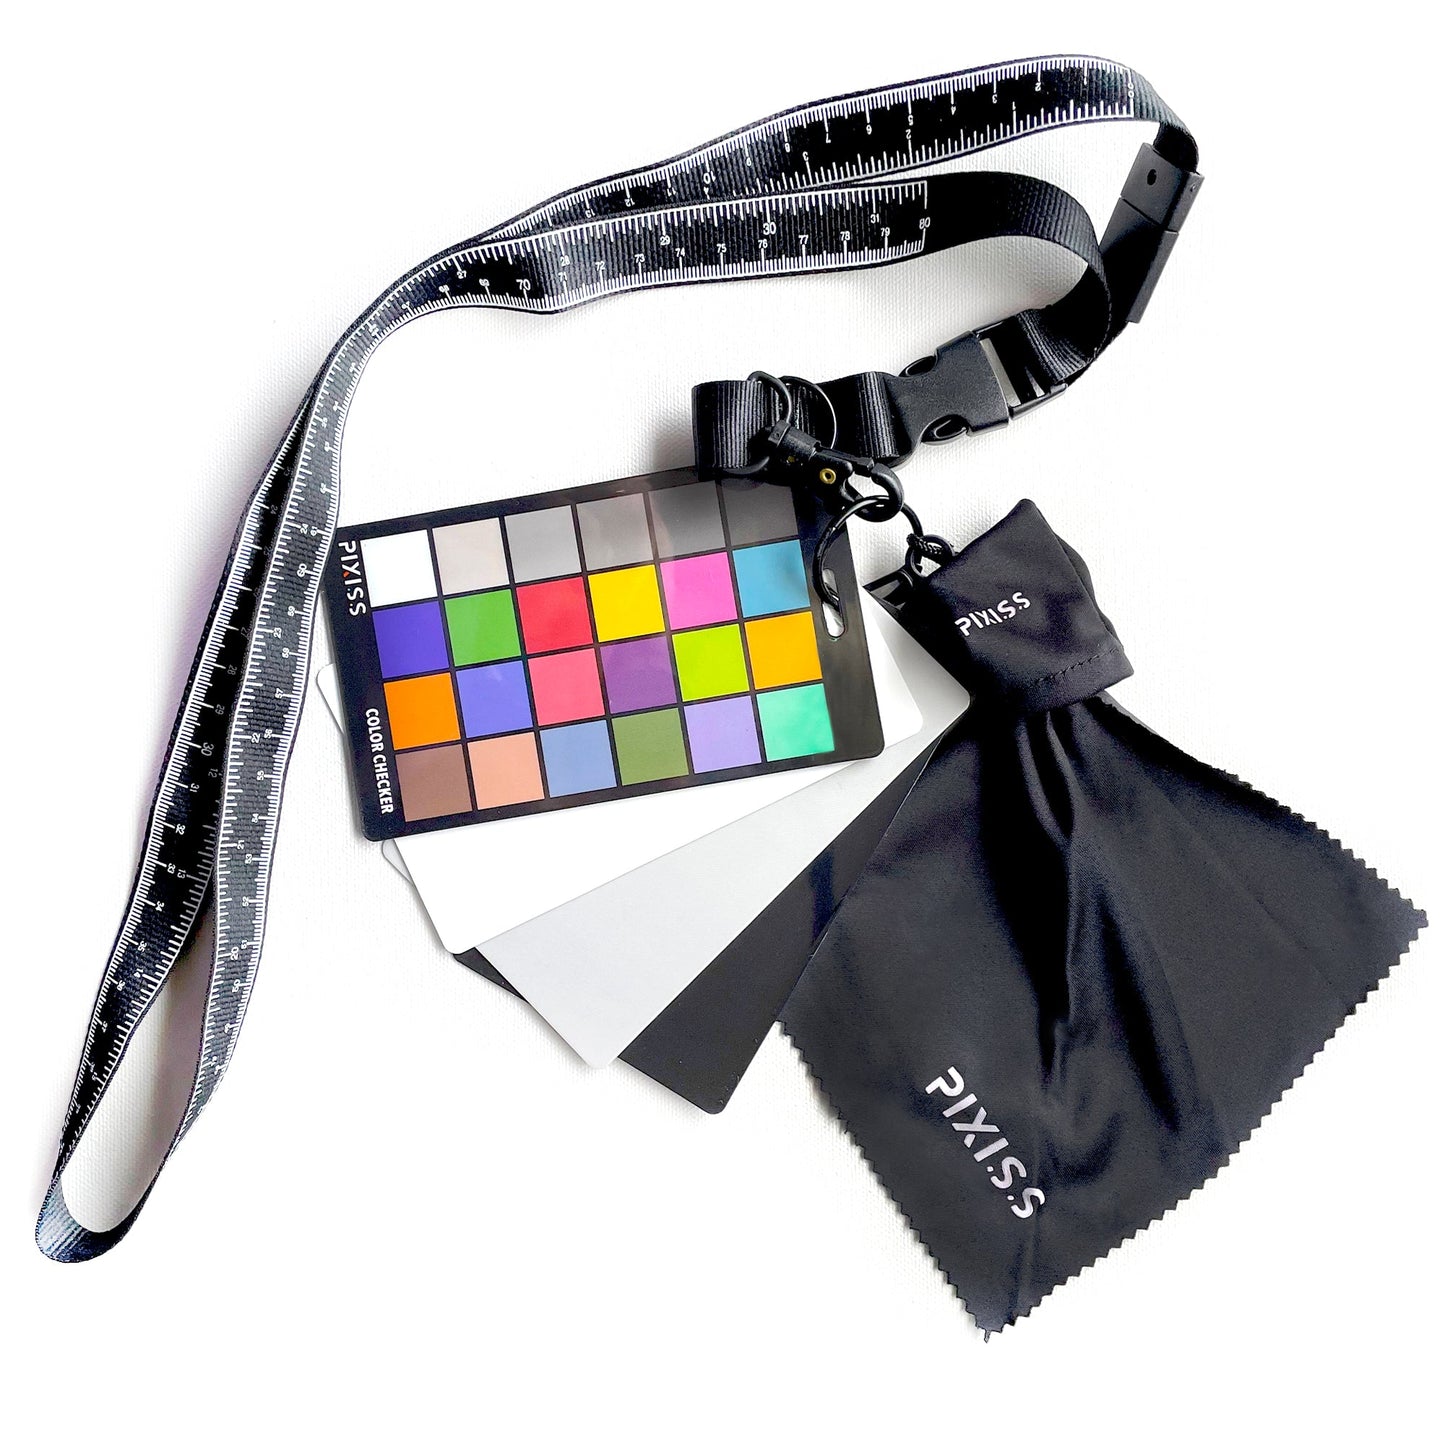 PIXISS Photography Calibration Cards with Lanyard and Lens Cloth by Pixiss